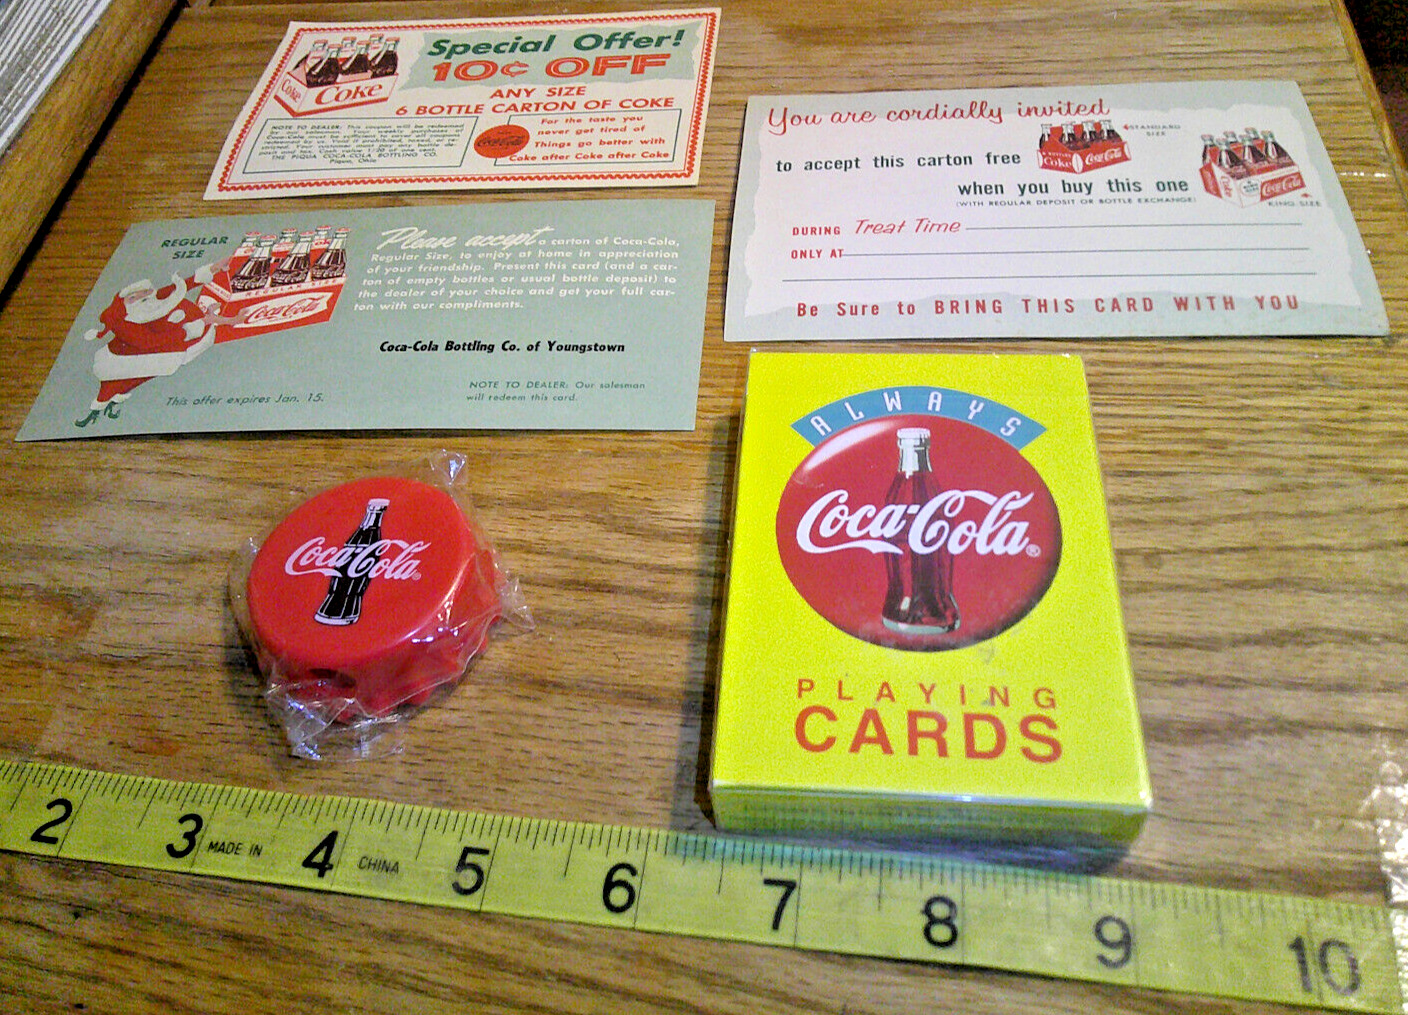 Lot of 3 Original Coca Cola Coupons deck of playing cards and a pencil sharpener